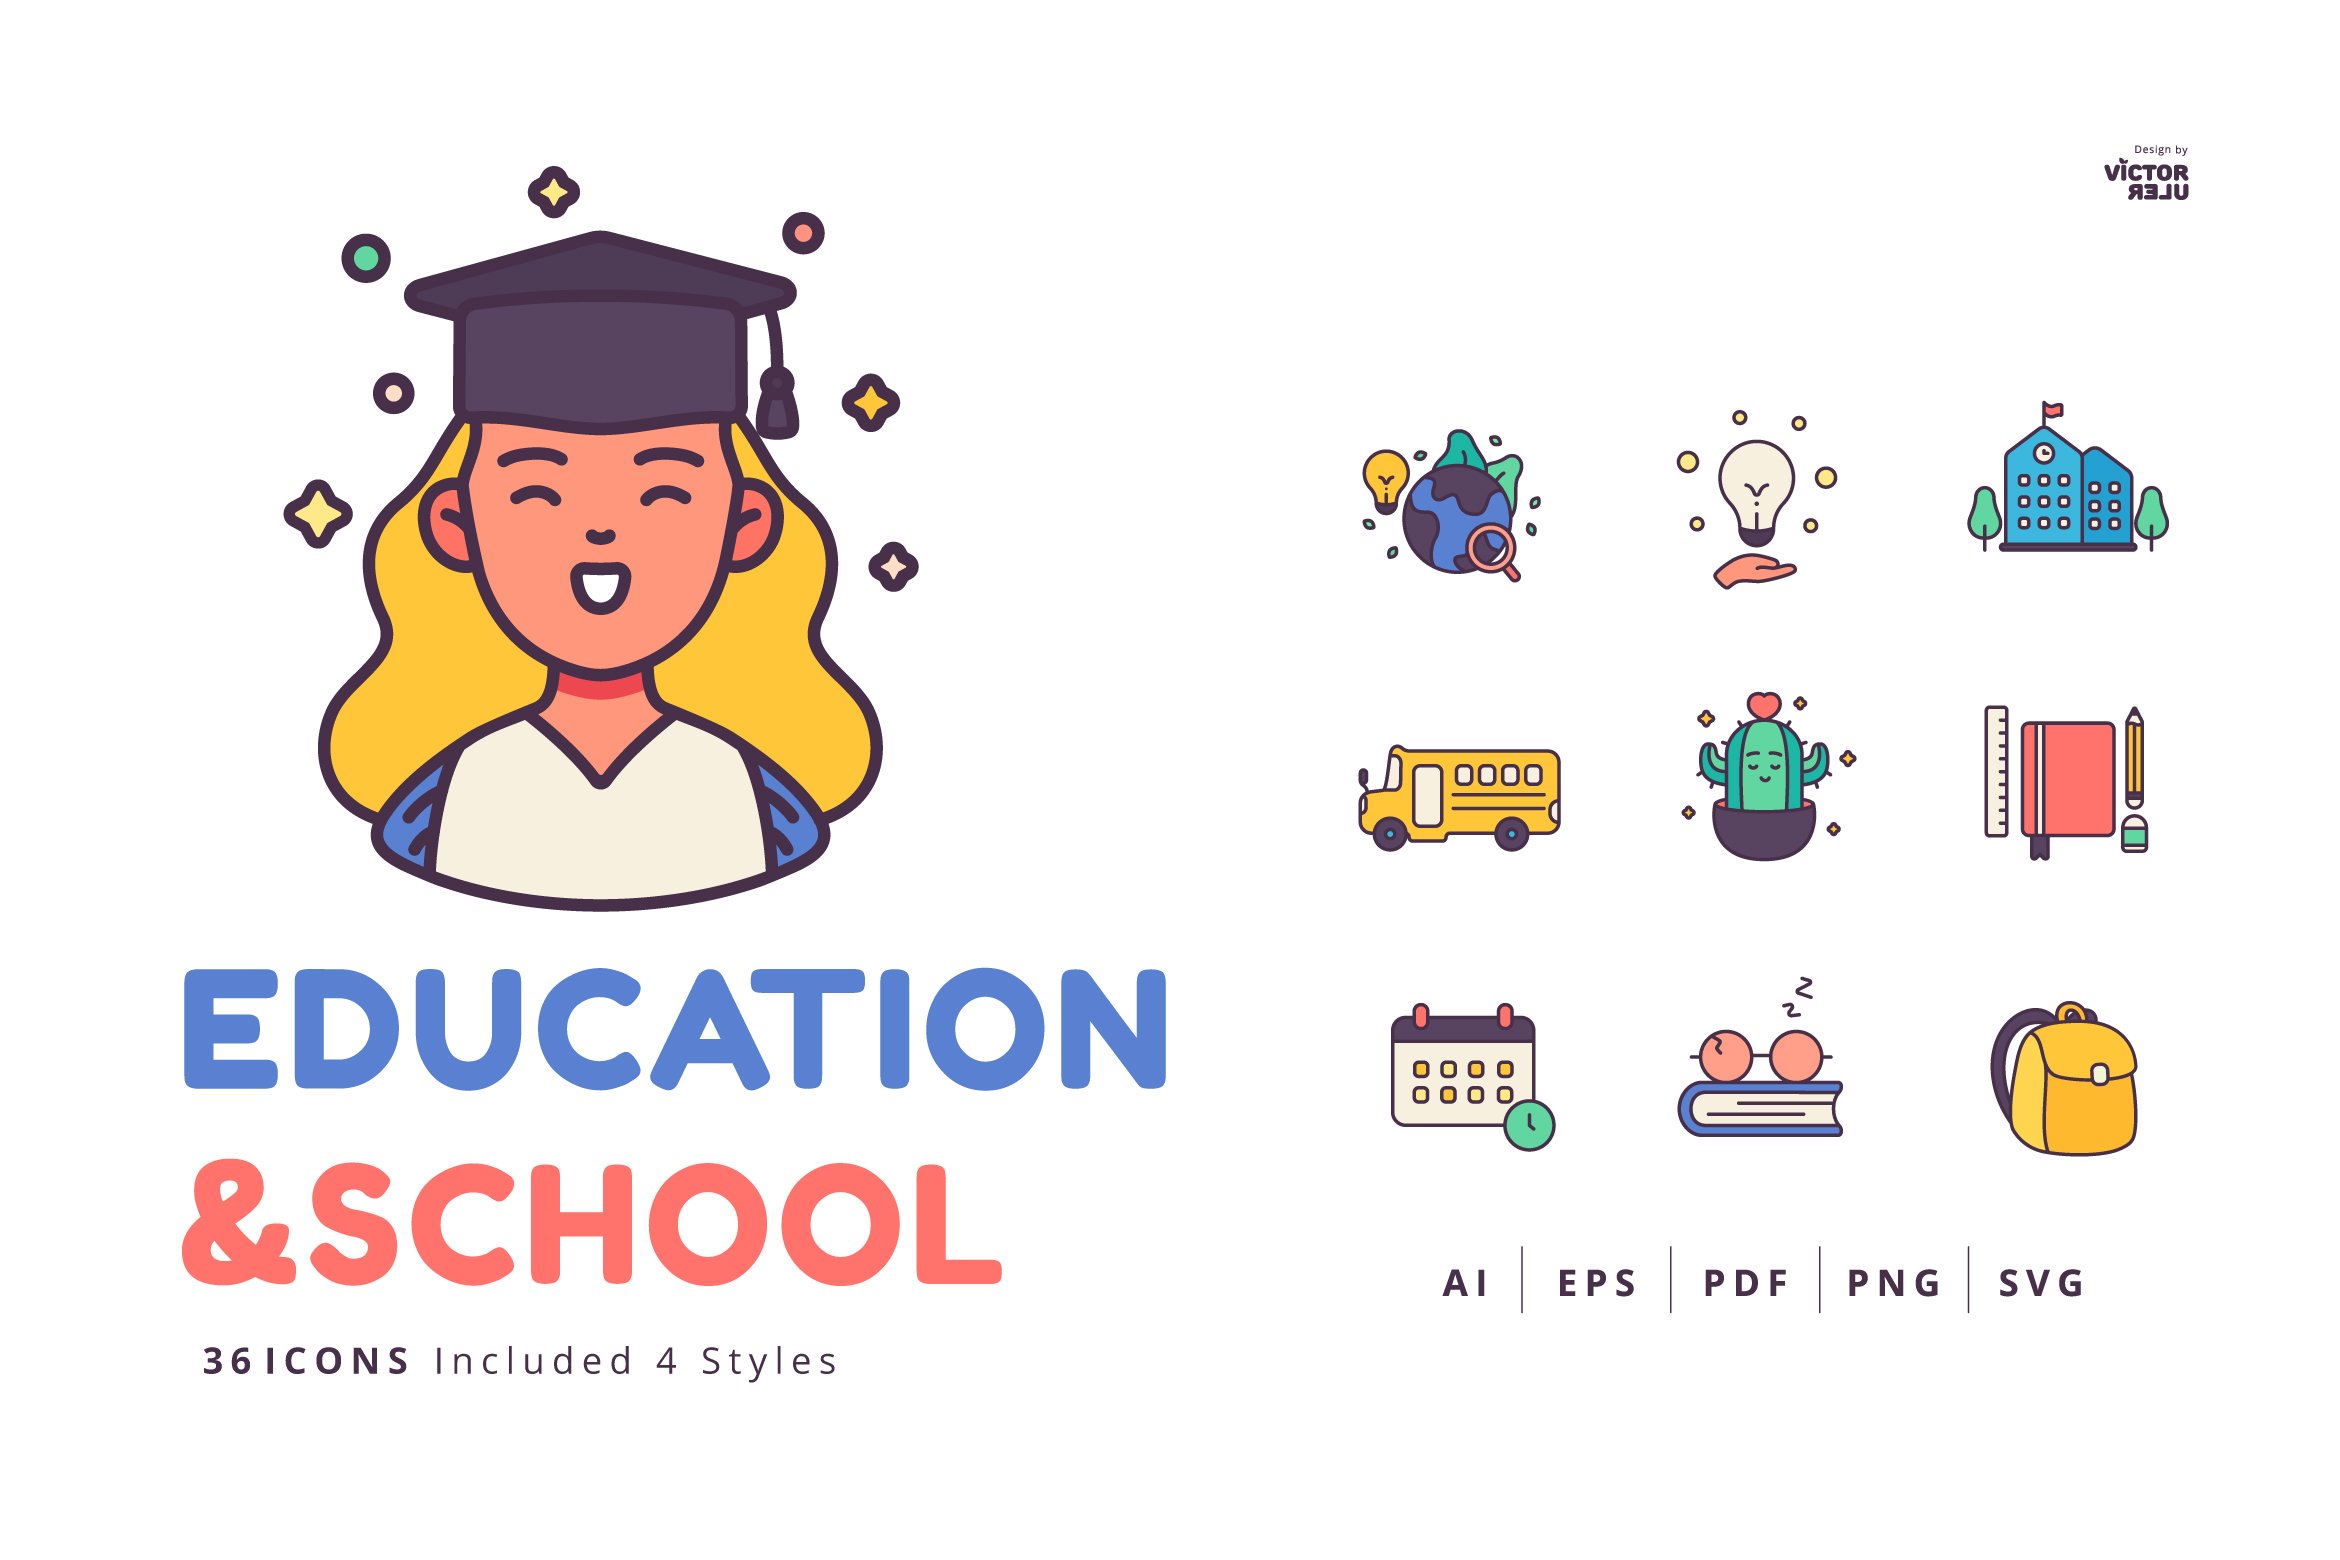 36 Icons Education and School cover image.